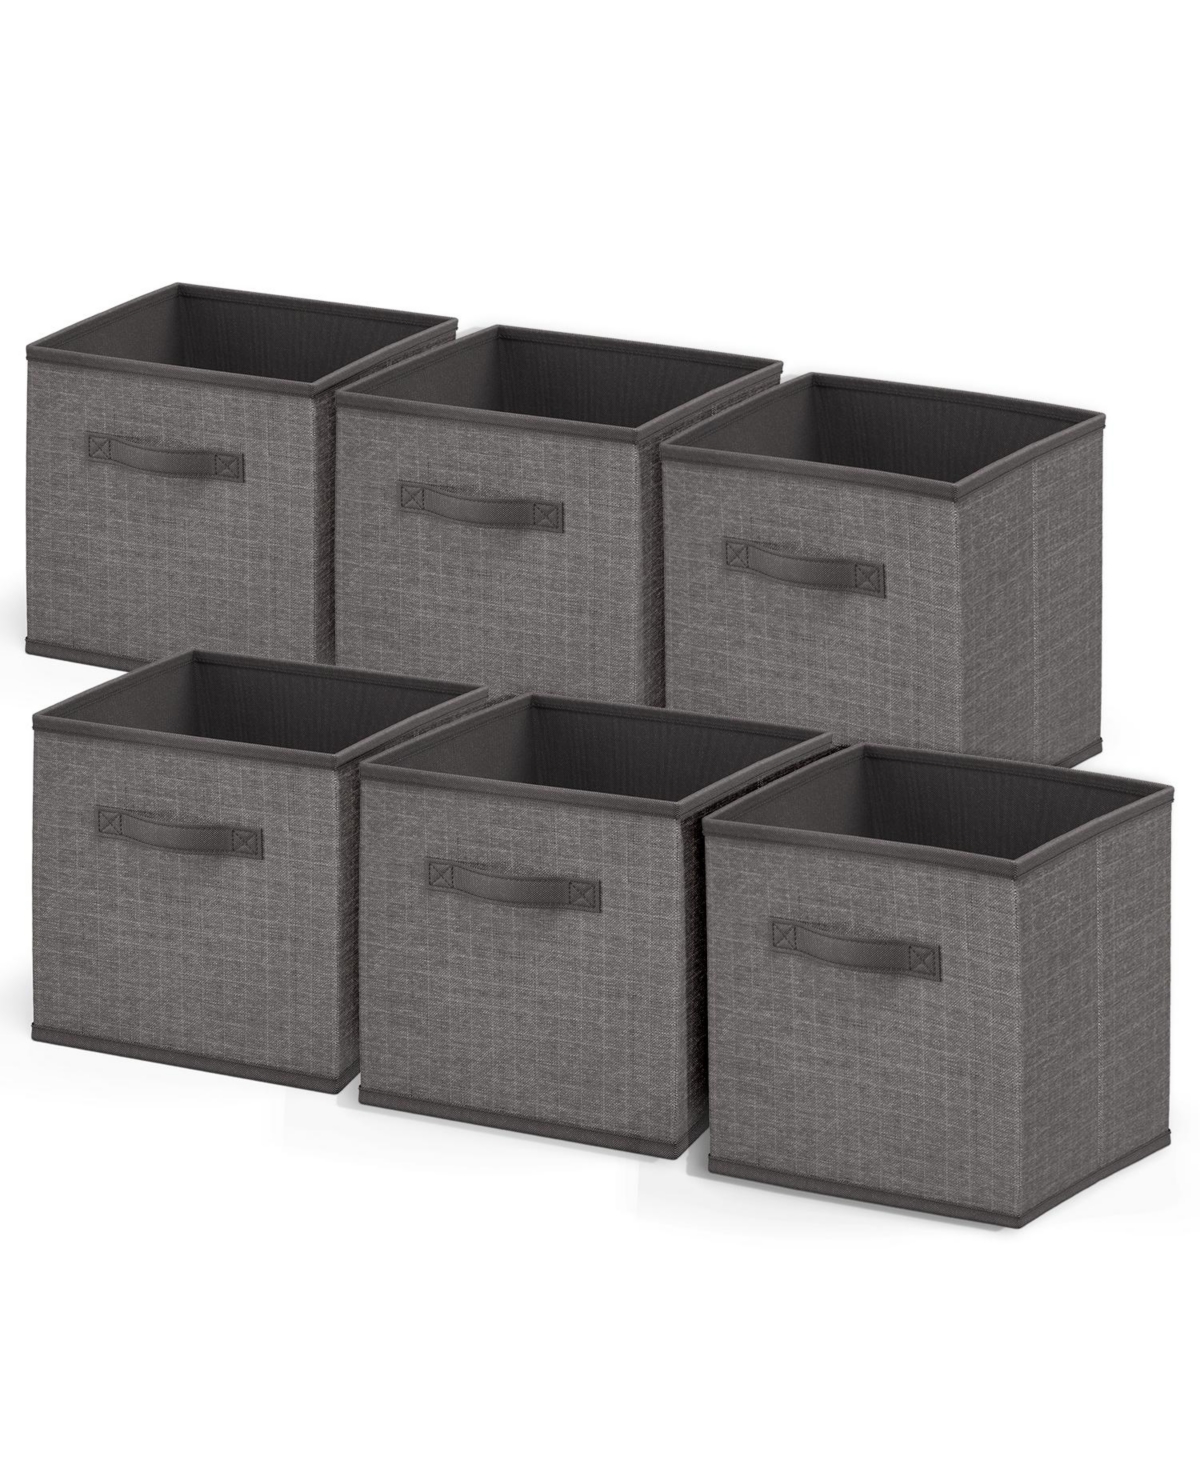 Foldable Fabric Cube Storage Bins with Handles - 6 Pack - Grey